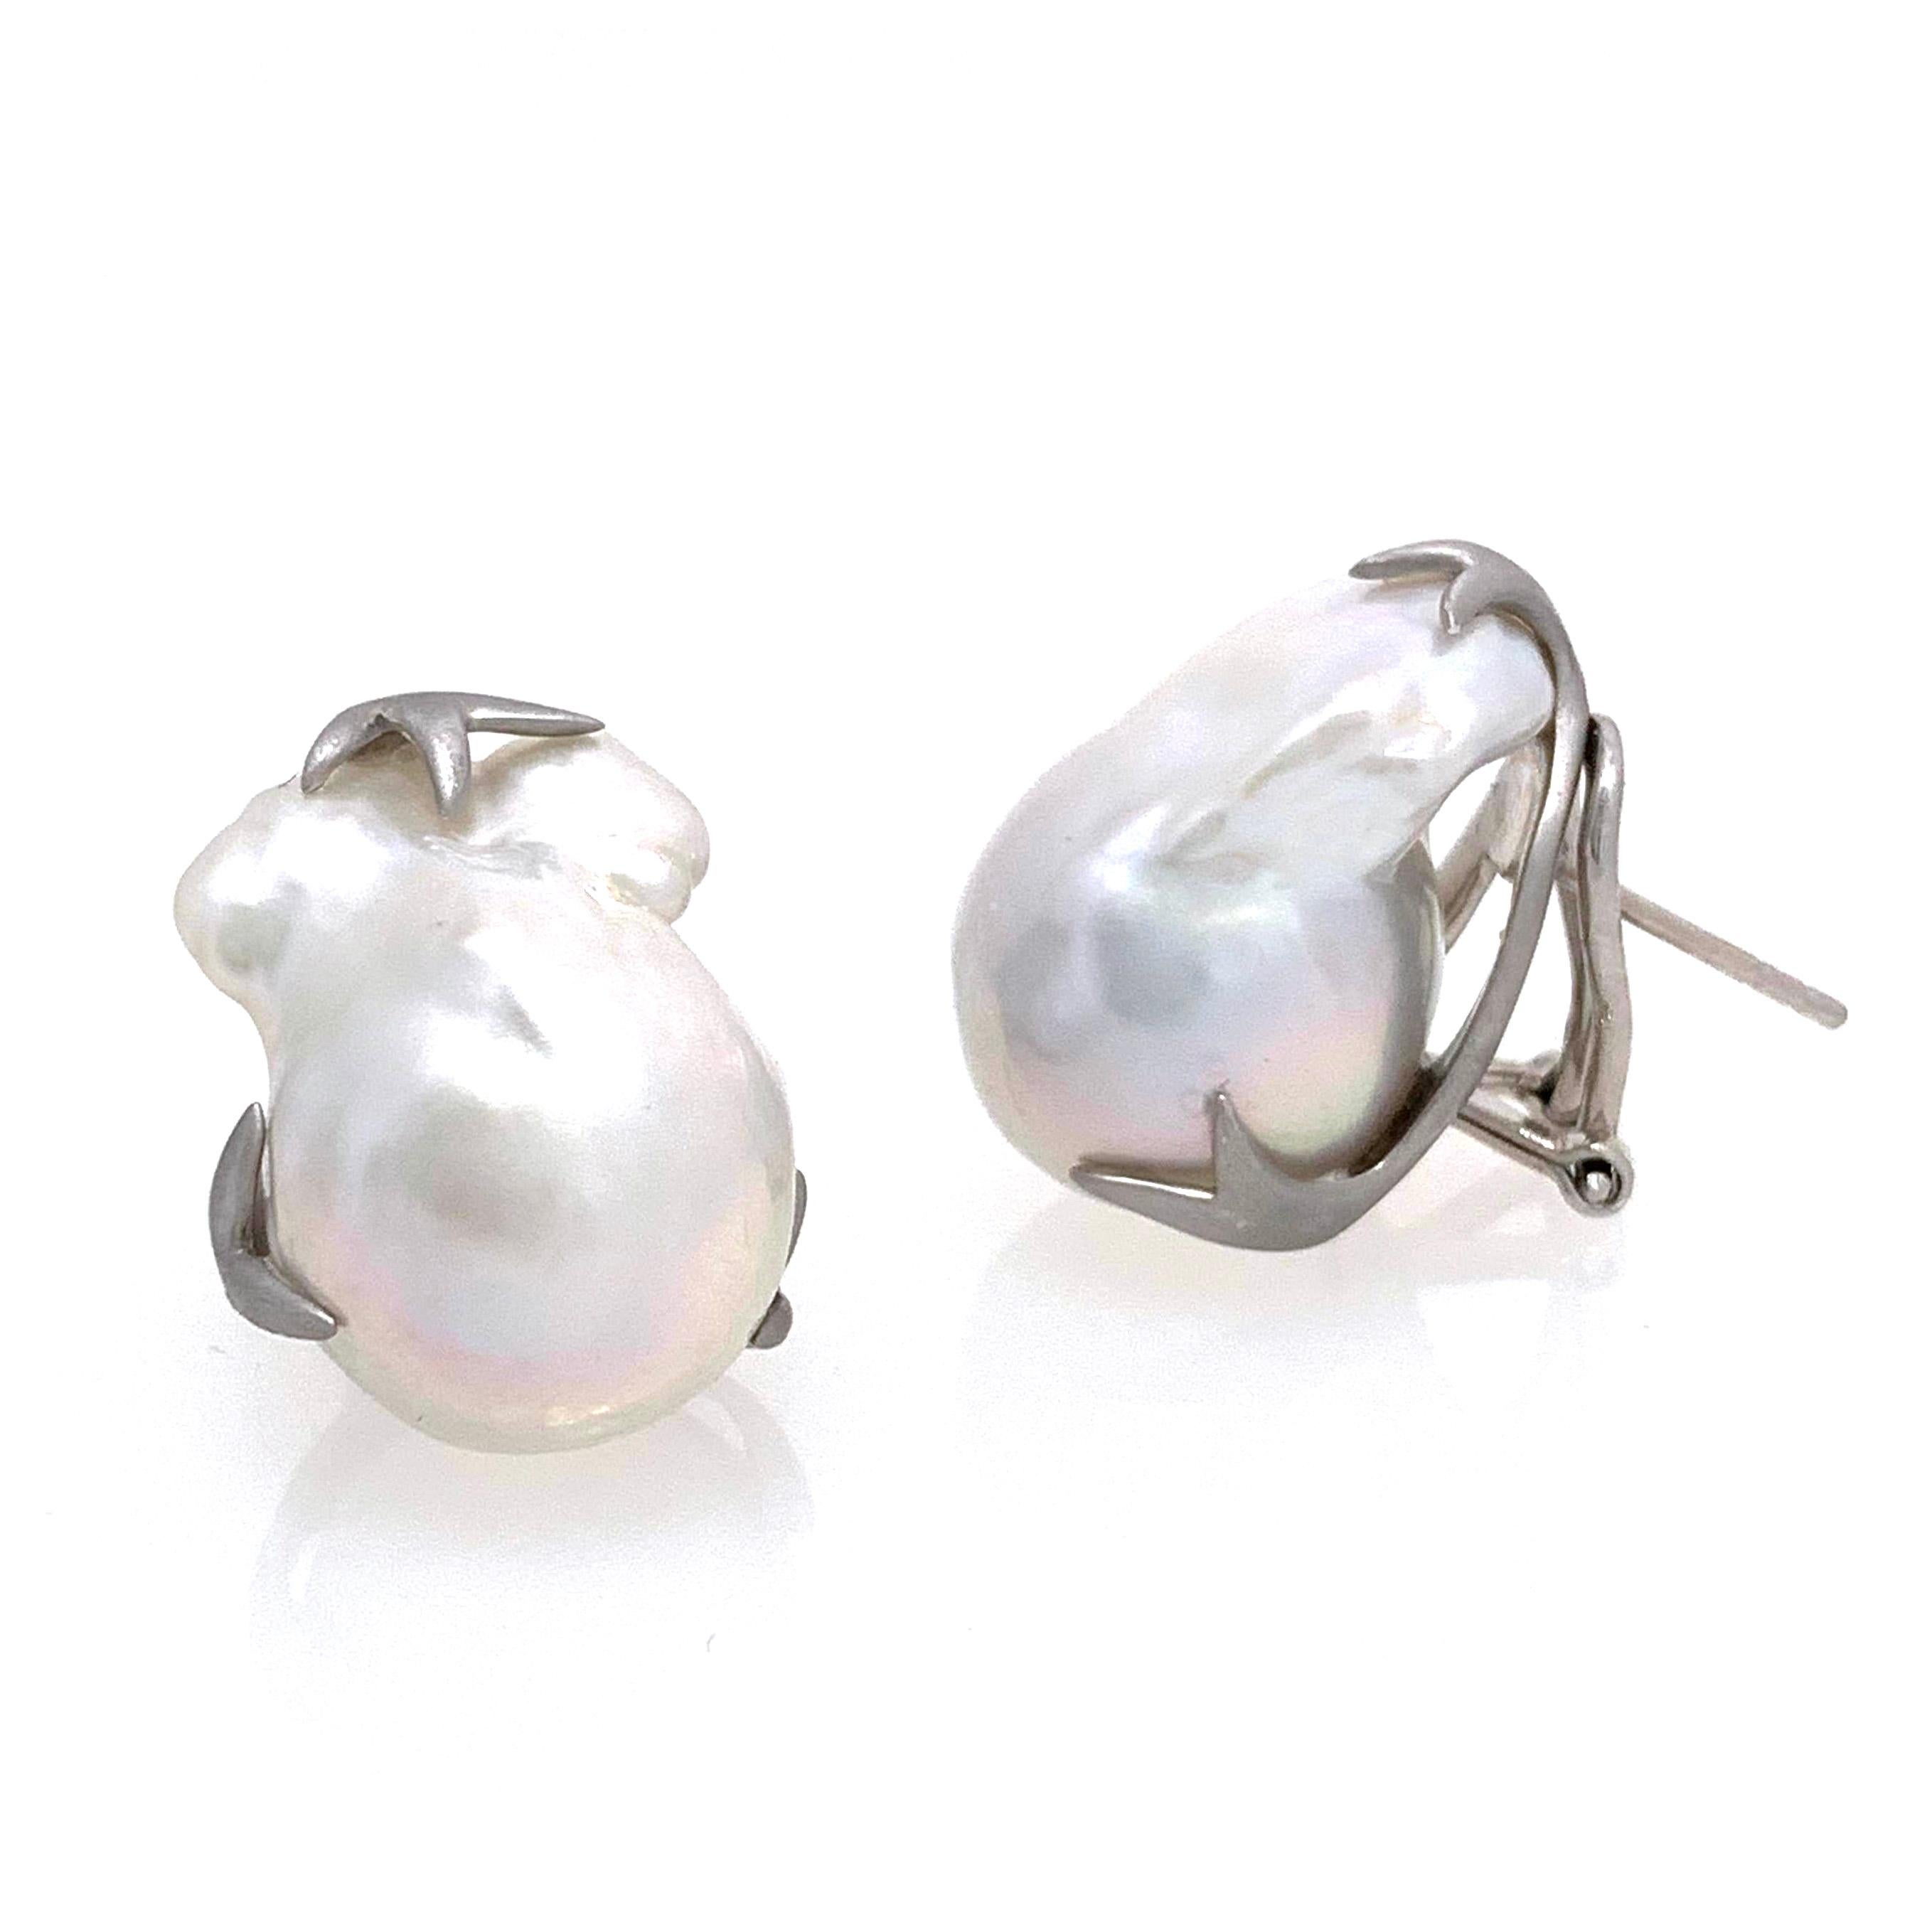 Beautiful pair of large lustrous freshwater baroque pearl earrings. The pair measures 16mm width and 23mm height, handset in platinum rhodium plated sterling silver (matte finish). Post-clip backs provide addition support and allow the earrings to